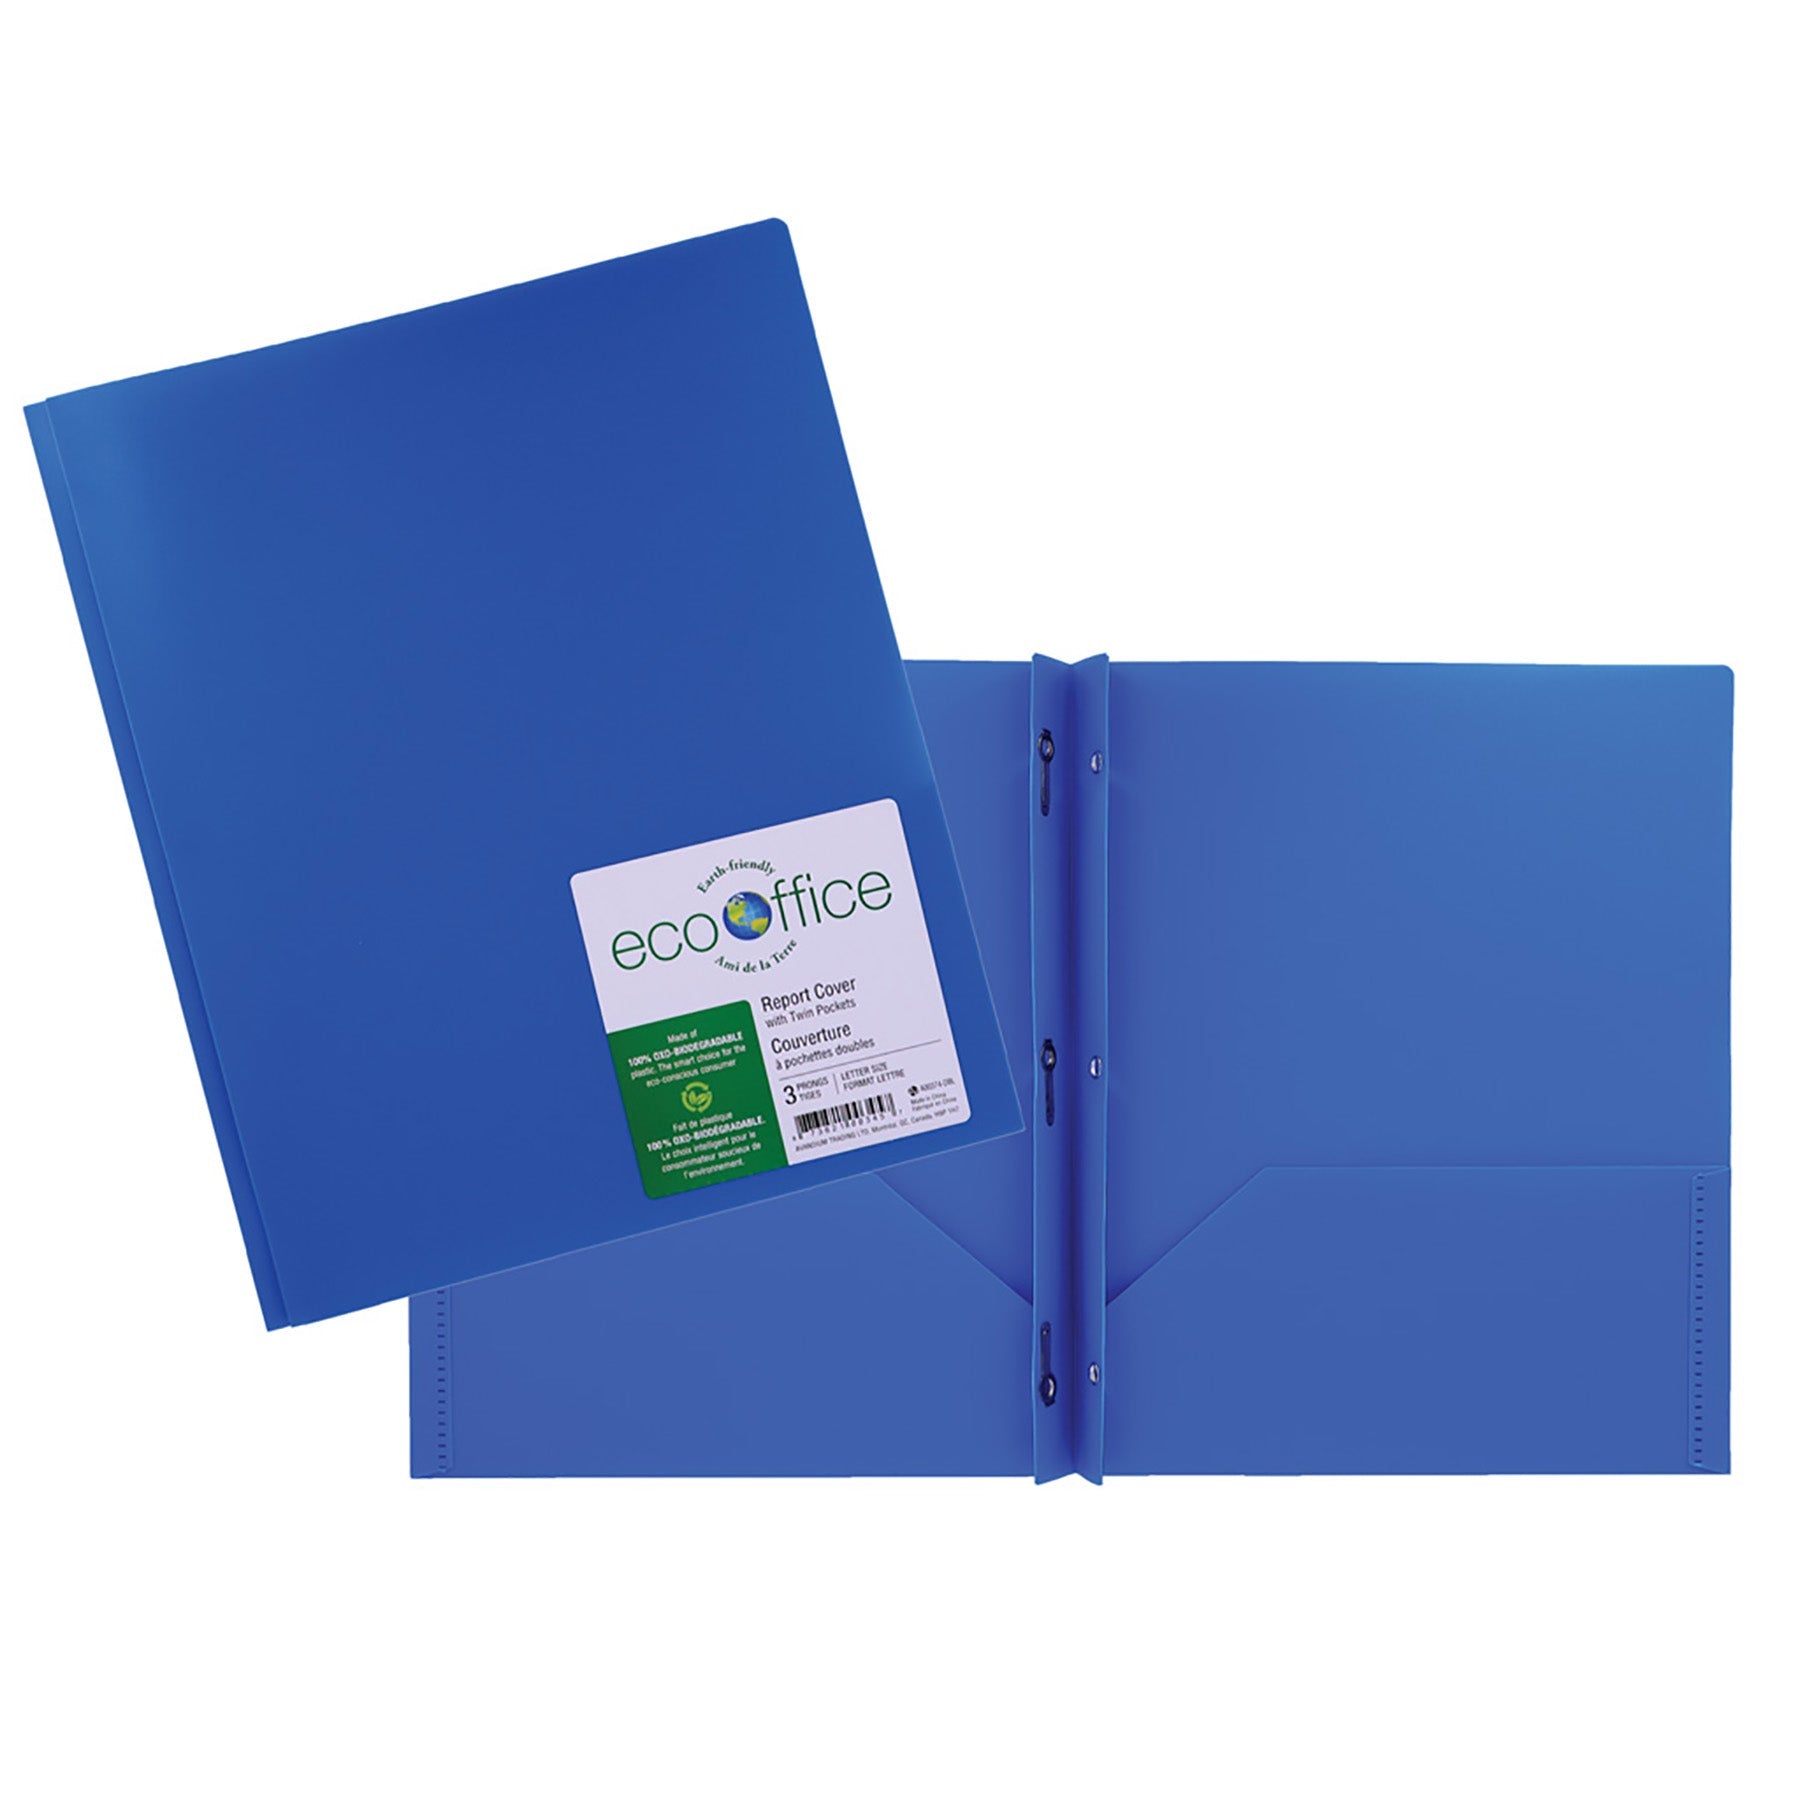 EcoOffice 3-Prong Report Cover 2 Pockets Dark Blue Plastic 11.25x9.25in